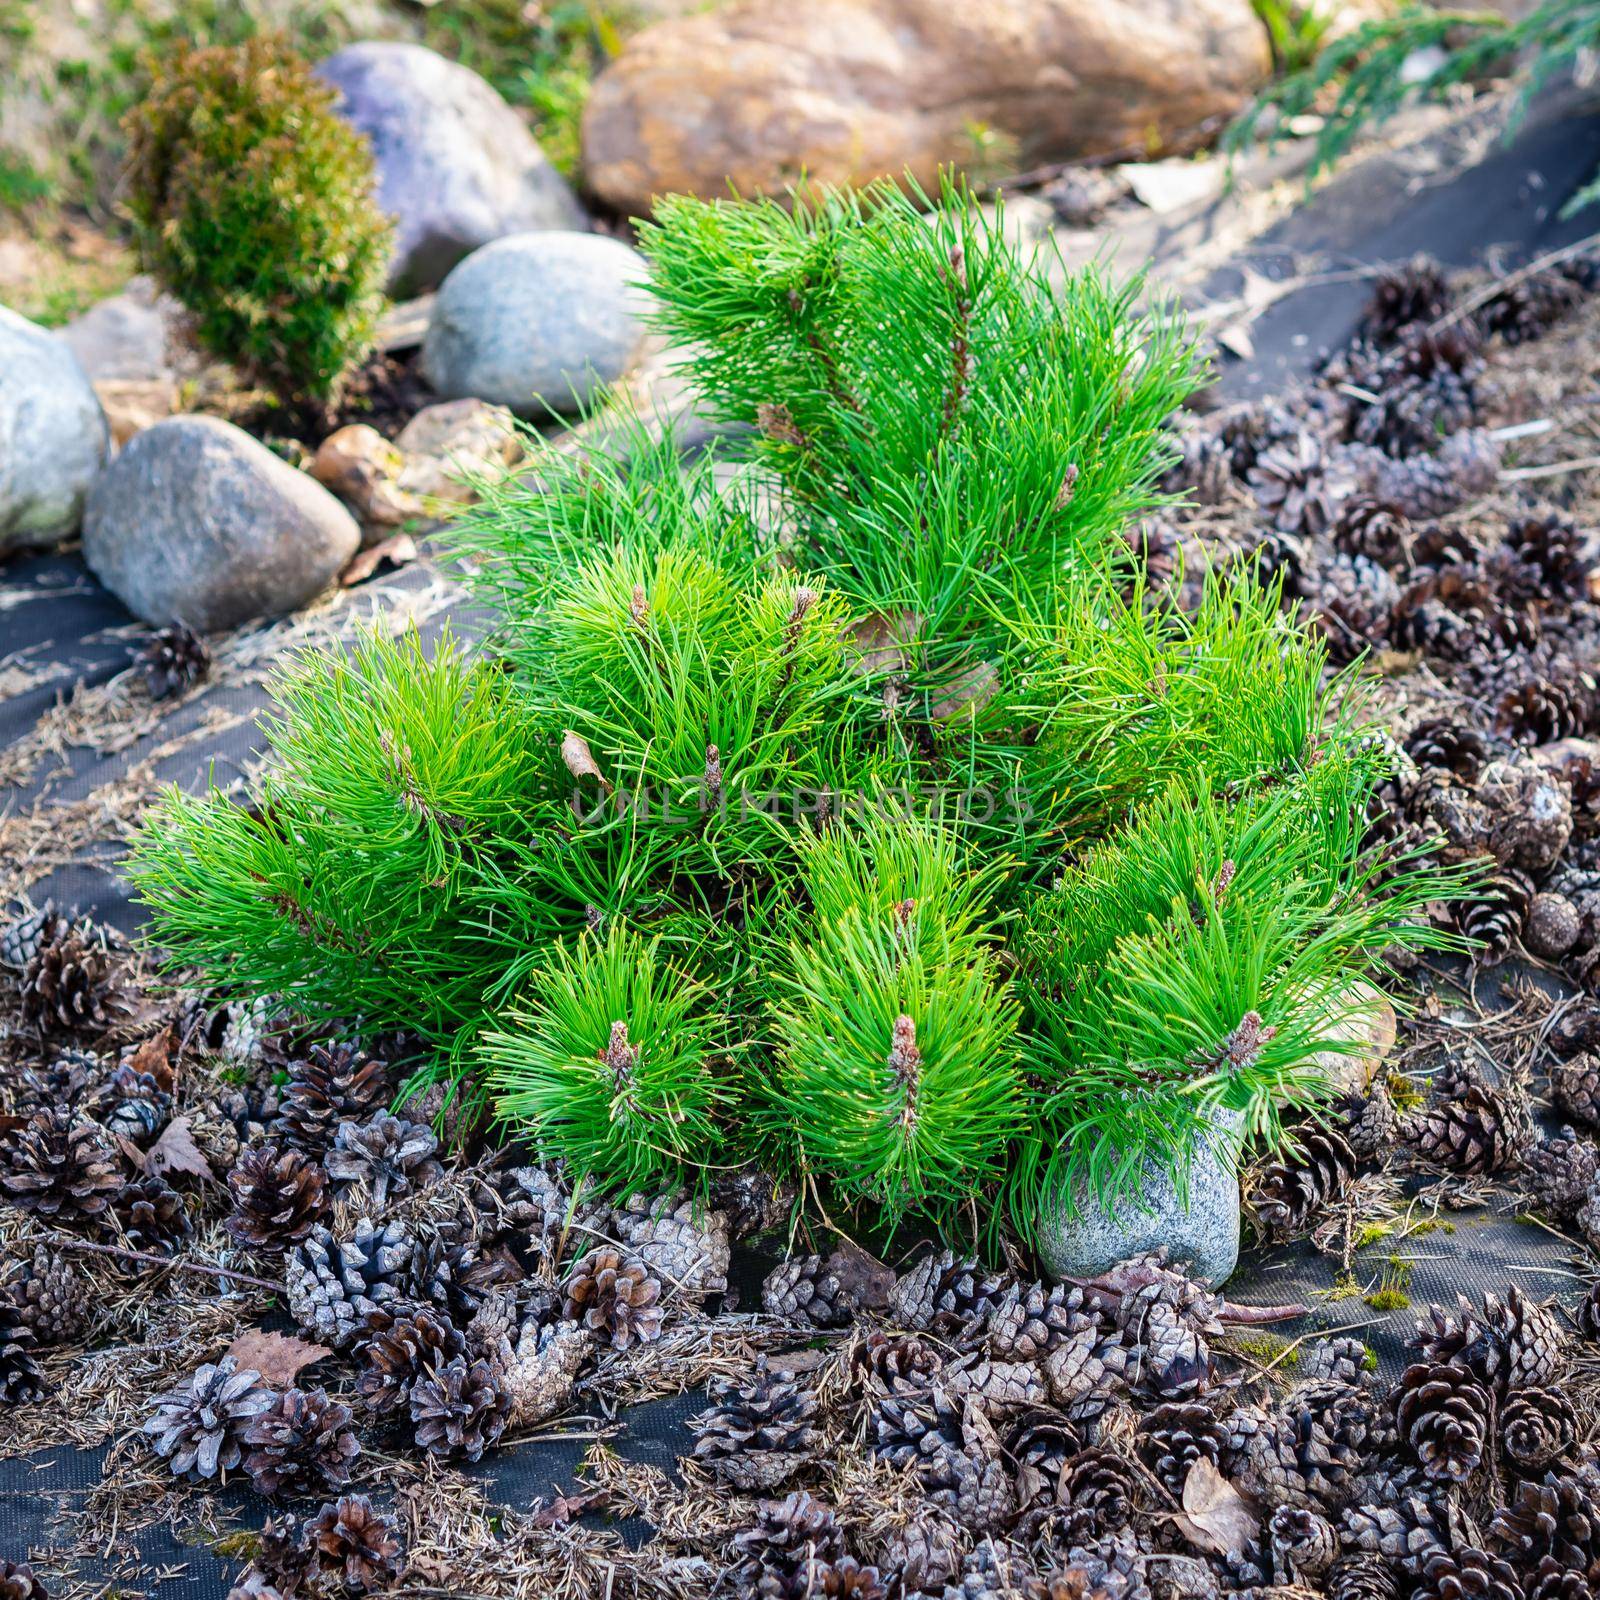 The small dwarf pine, a family of conifers, on a background of pine cones by NataBene